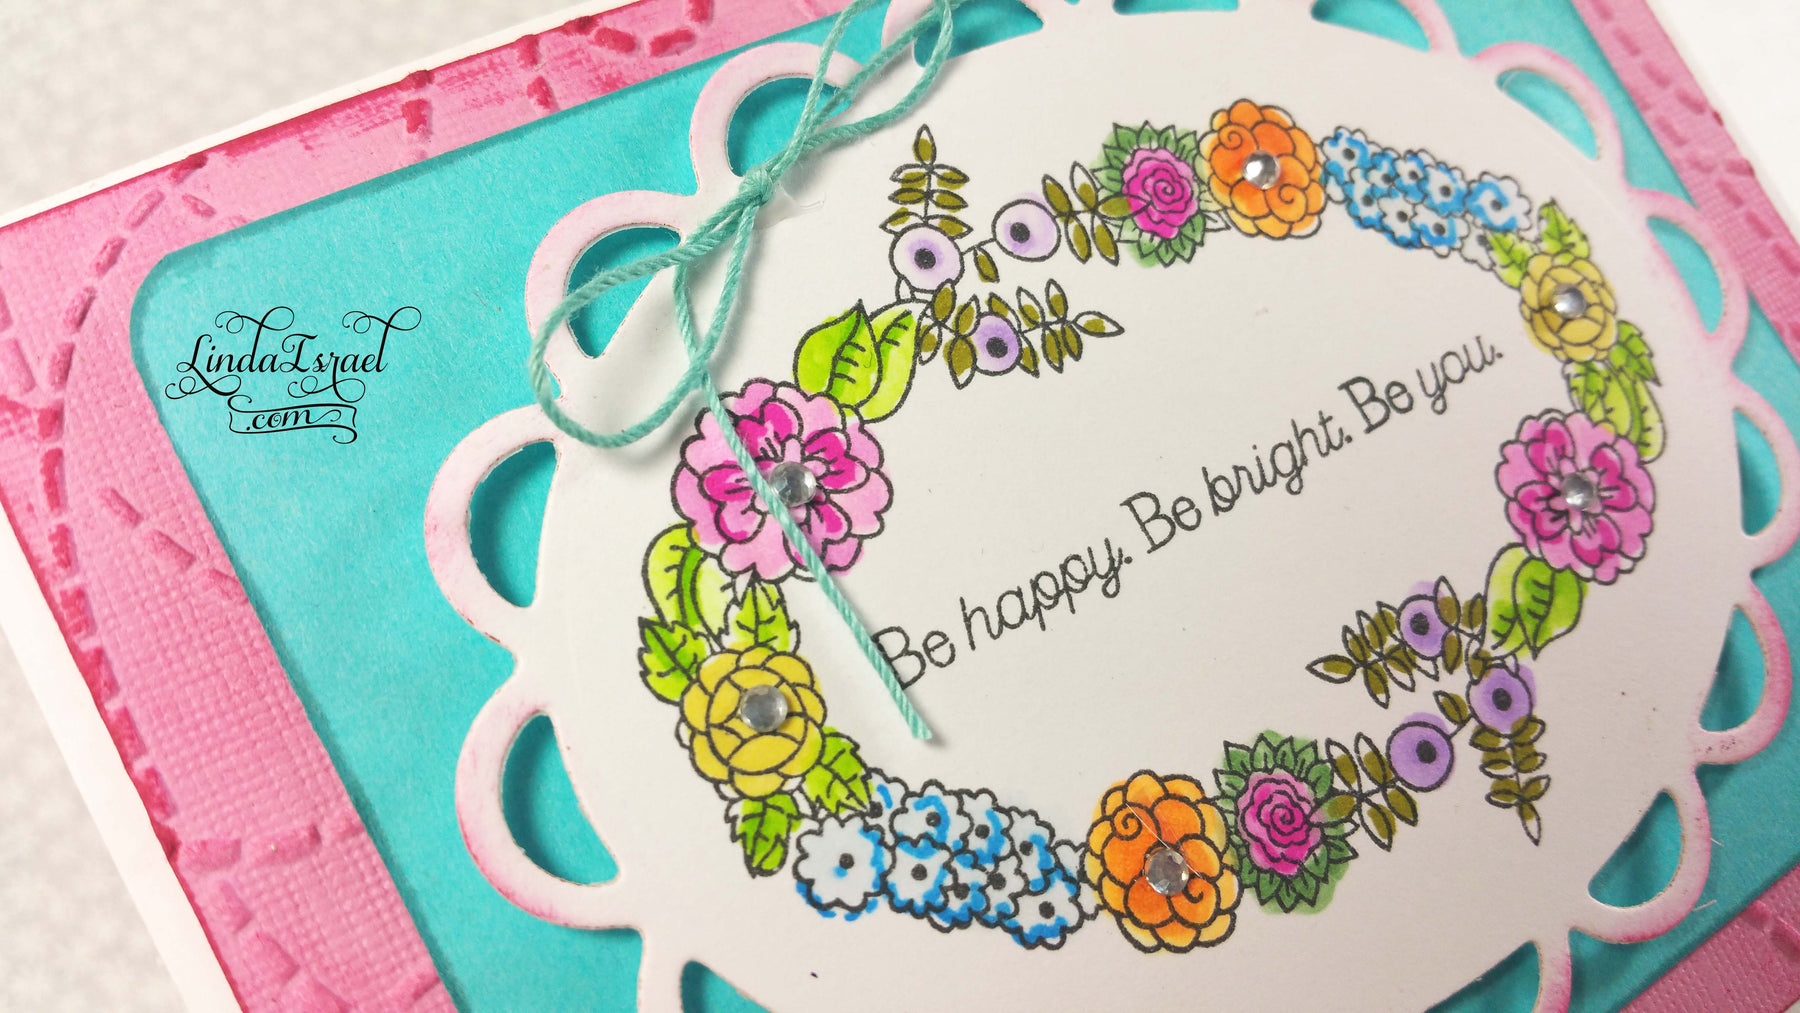 Be happy Be bright Be you a greeting card